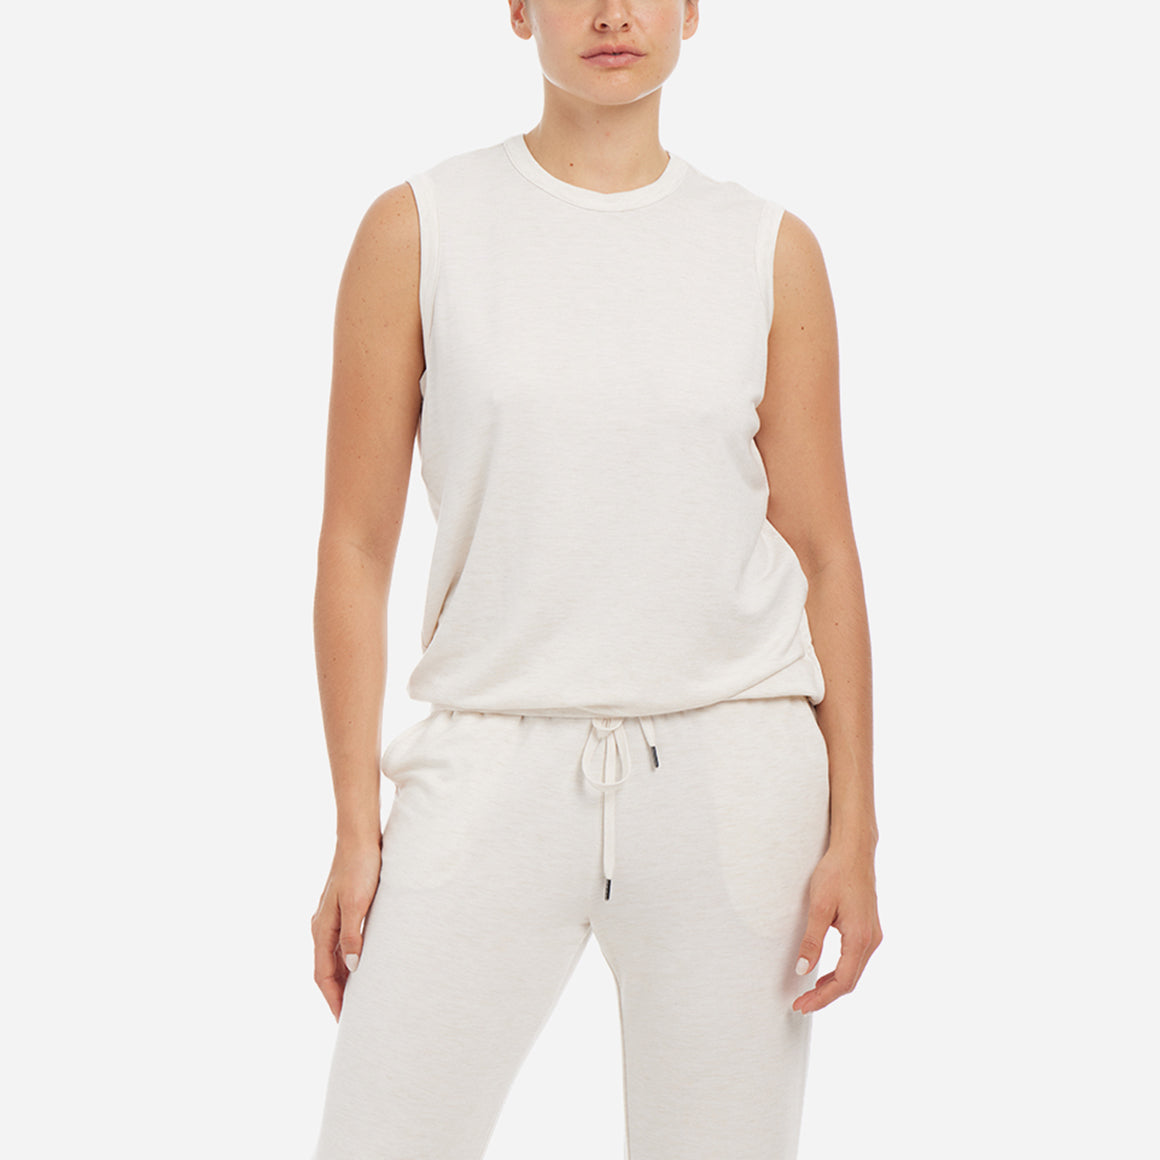 This cozy tank features a relaxed fit with a high neckline and a banded hem for a secure fit. To complete the look, pair with the Essential Lounge Pants.